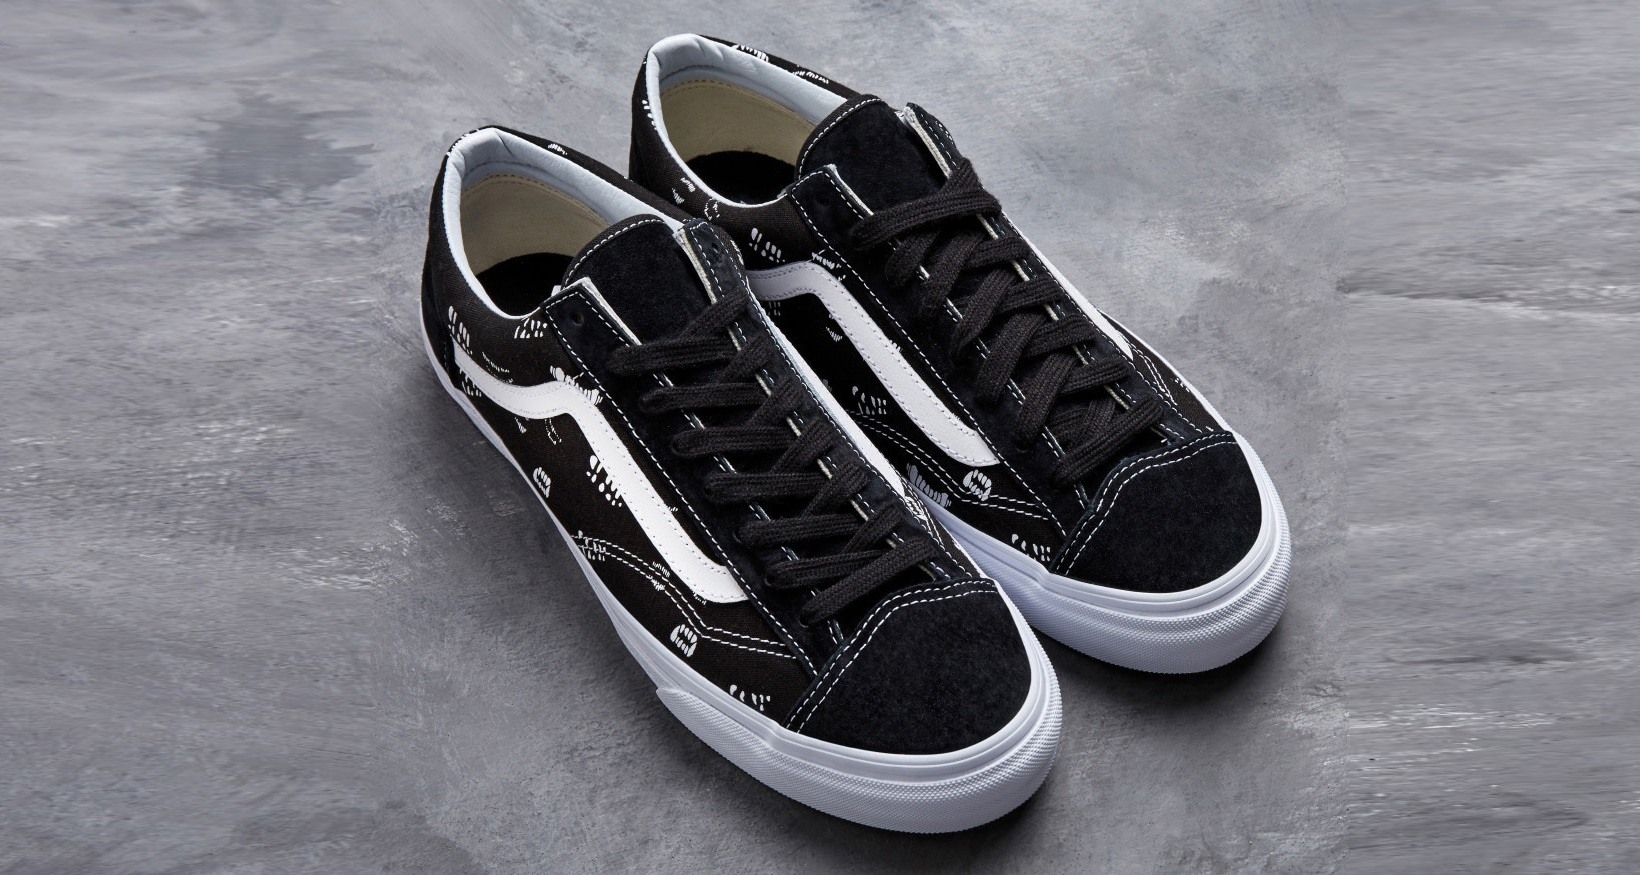 vans year of the dog